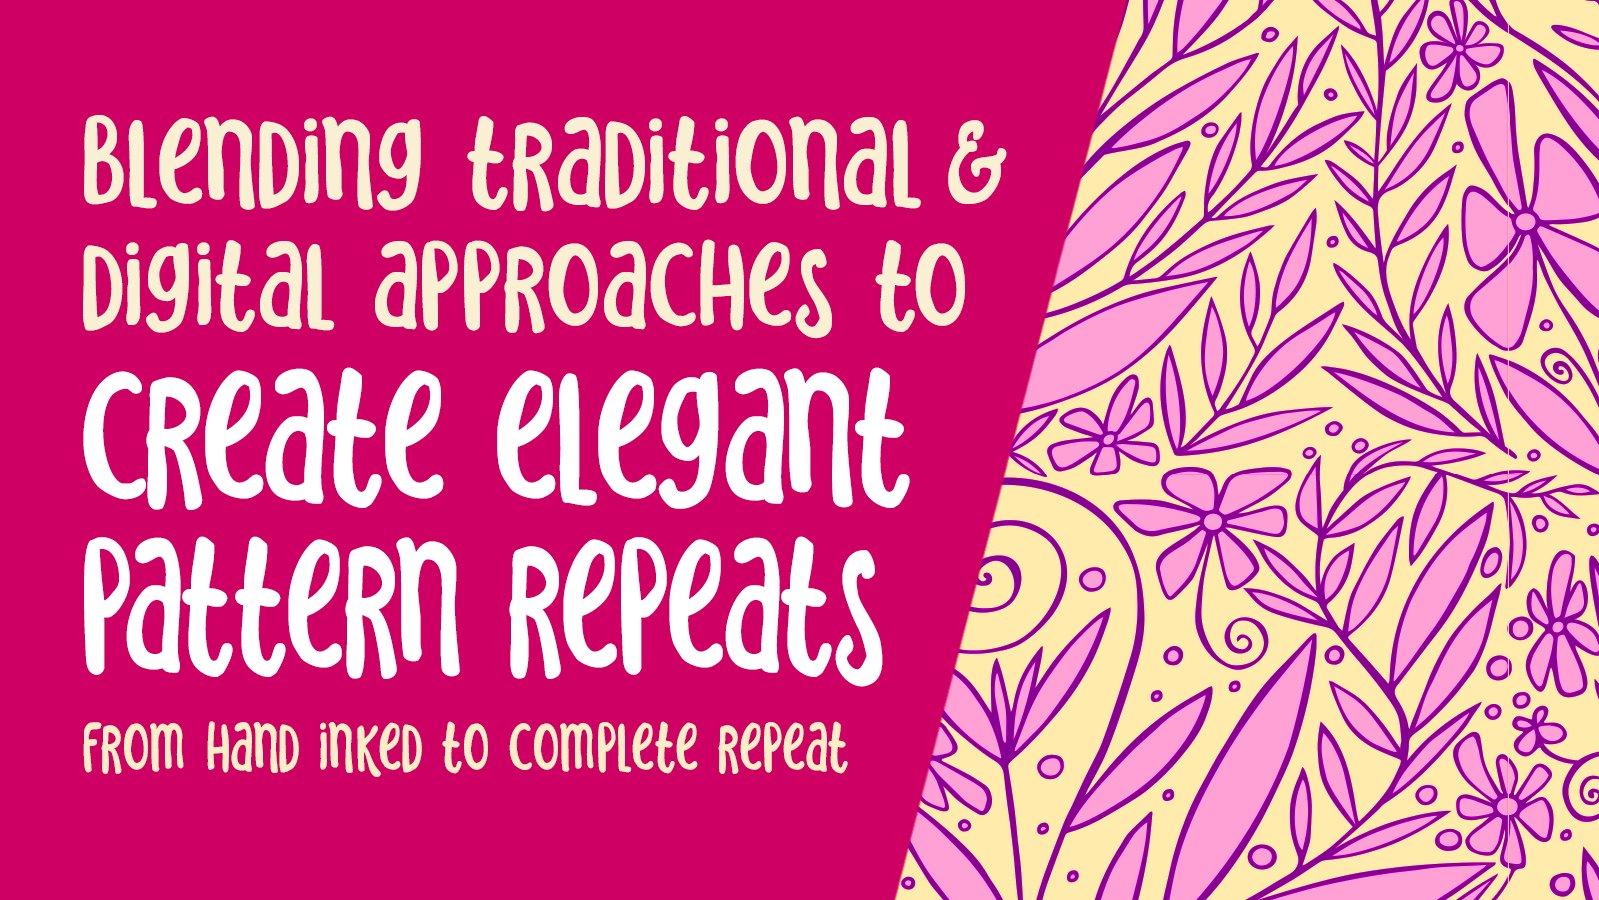 Blending Traditional and Digital Approaches to Create Elegant Pattern Repeats